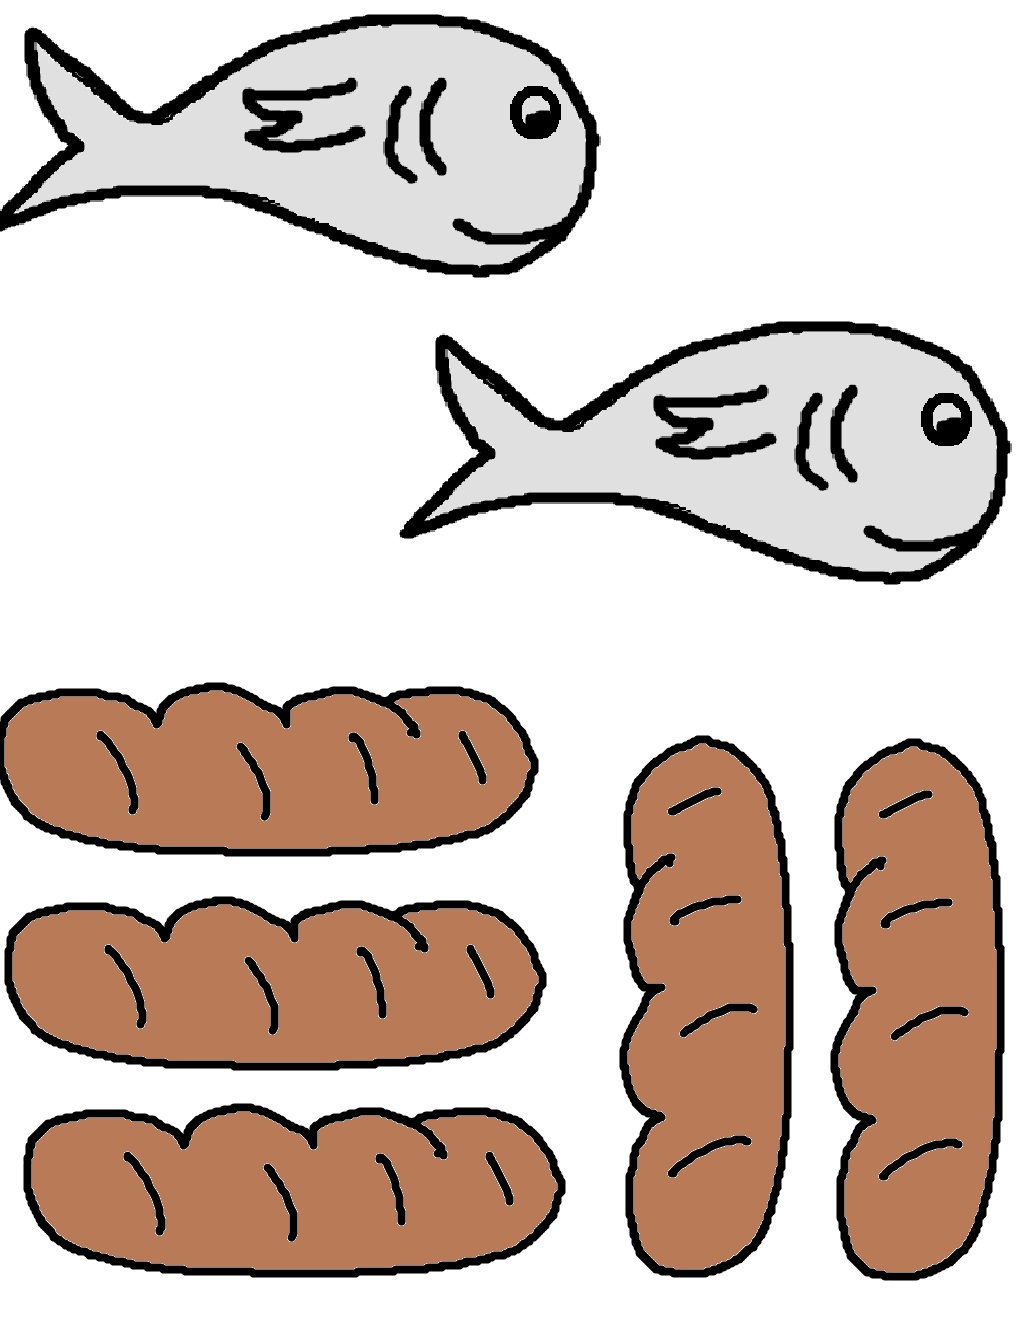 Loaf Of Bread Template - ClipArt Best